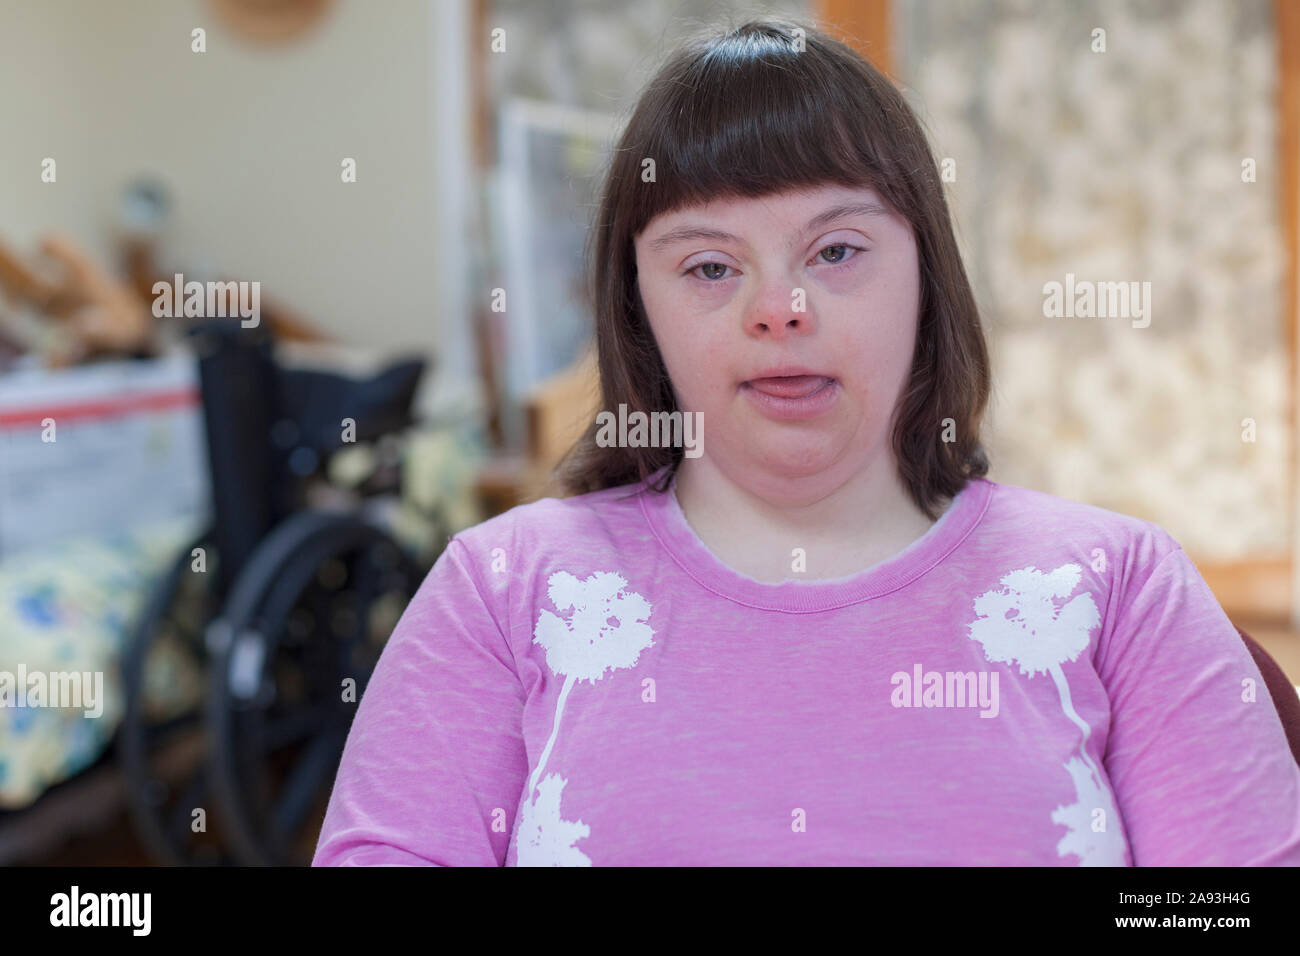 Girl with Down Syndrome Stock Photo